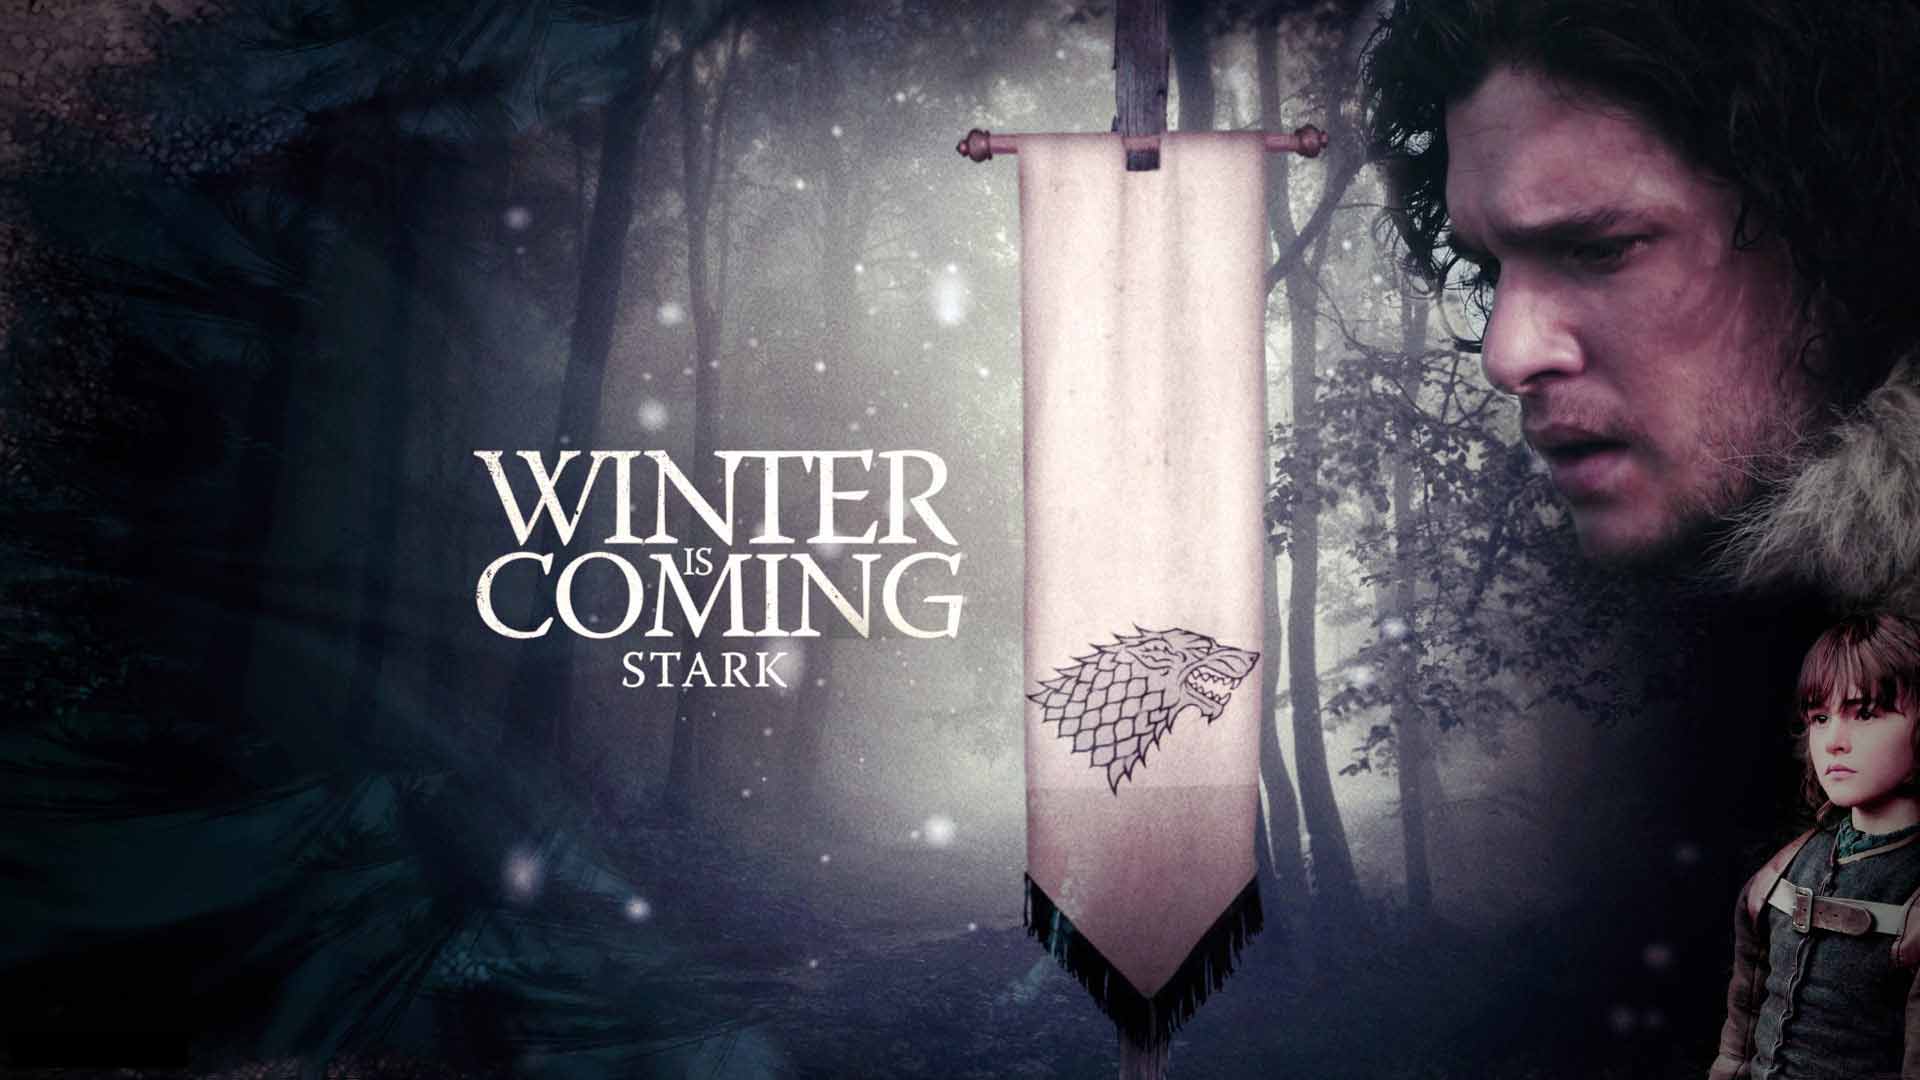  Wallpapers Backgrounds Game of Thrones Seasons 3 HD Wallpapers 1920x1080